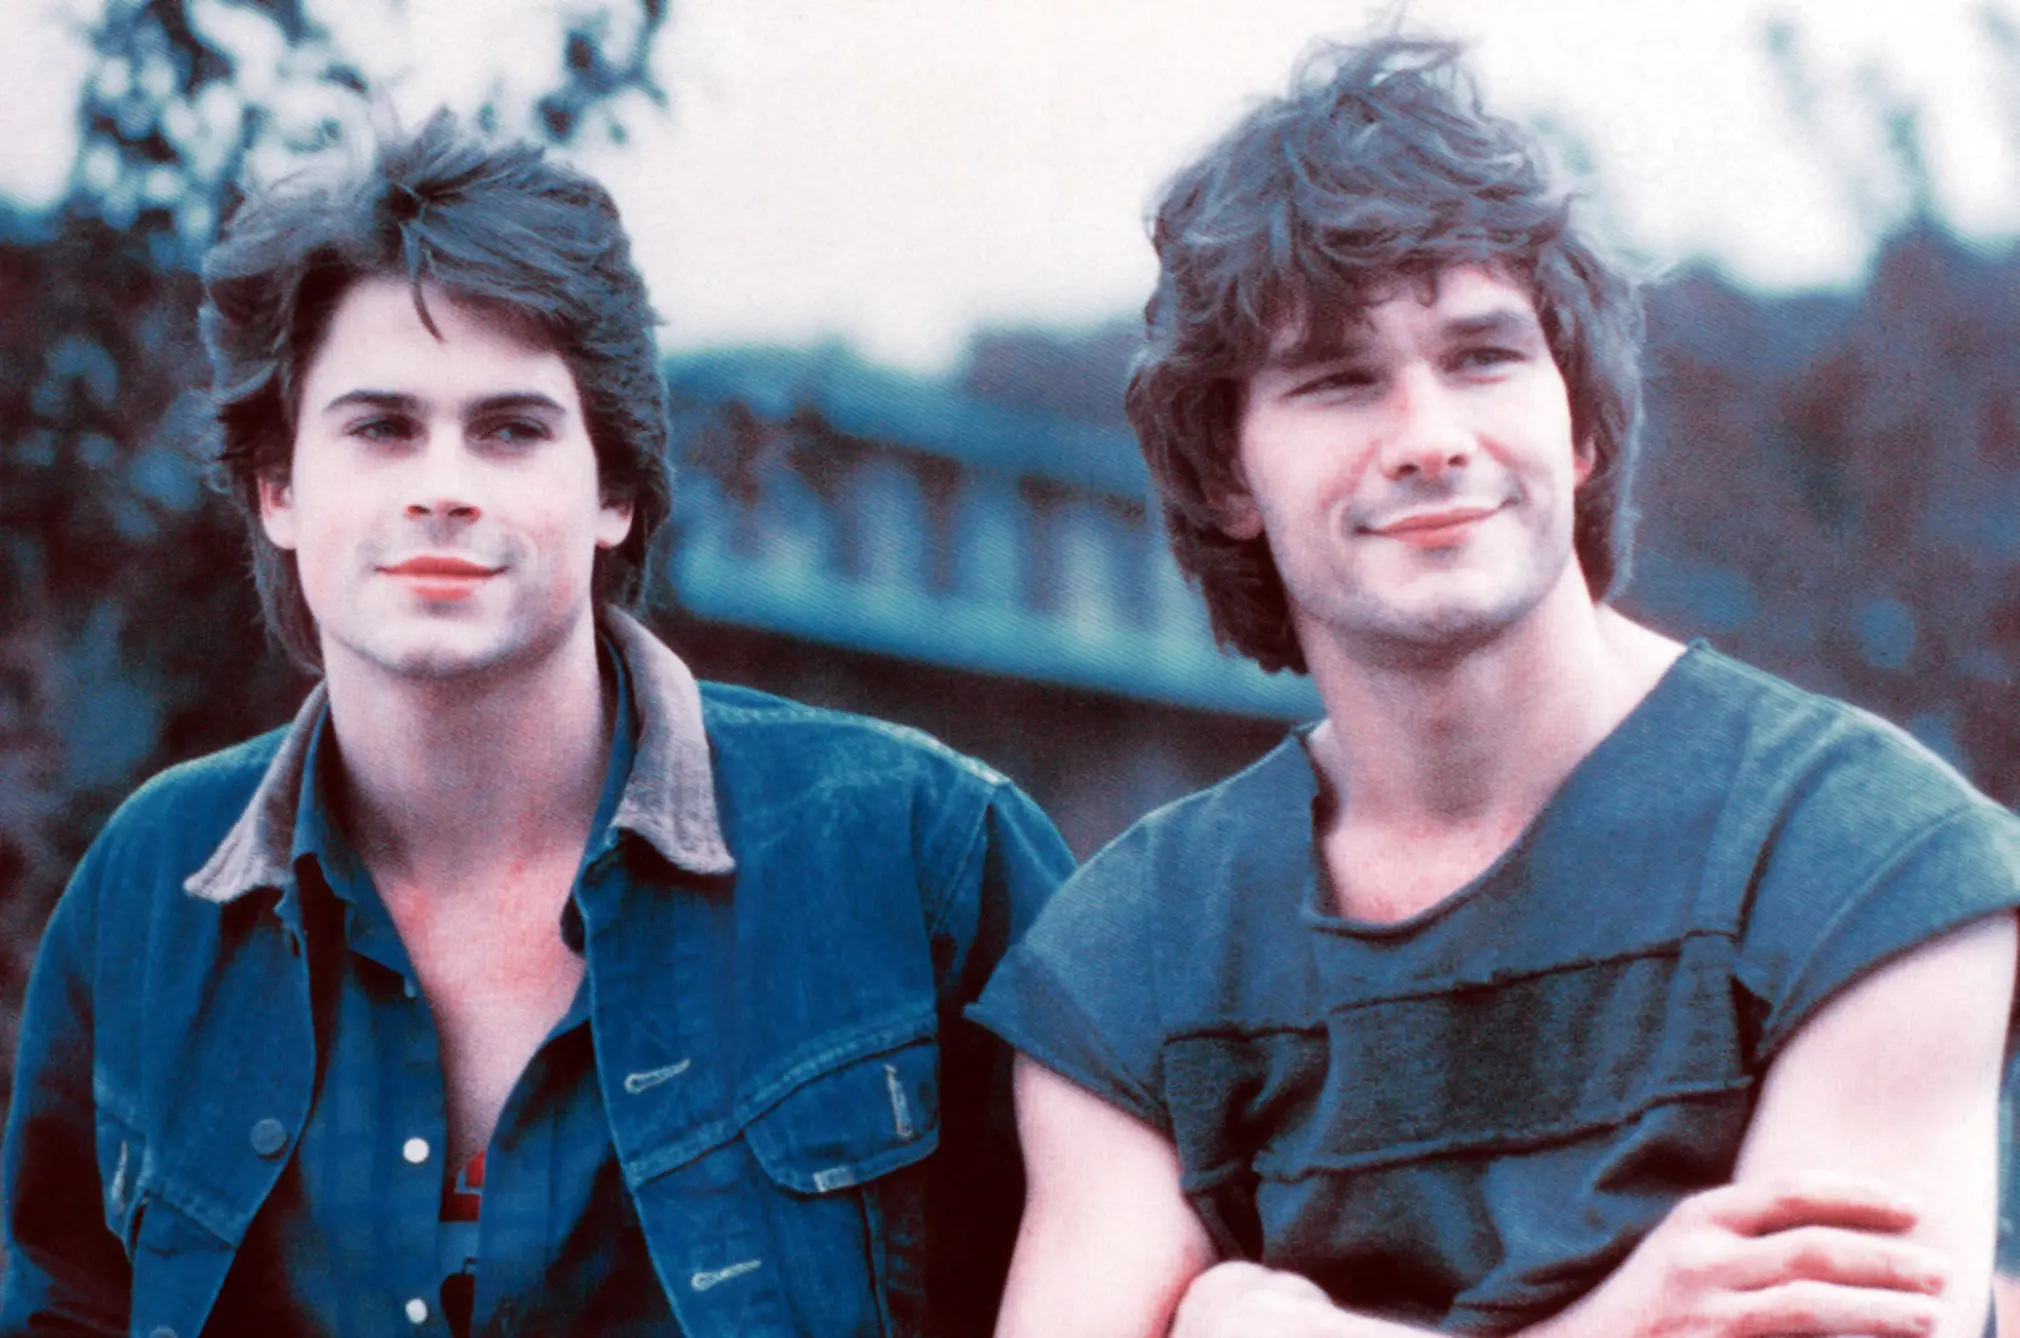 YOUNGBLOOD, from left: Rob Lowe, Patrick Swayze, 1986